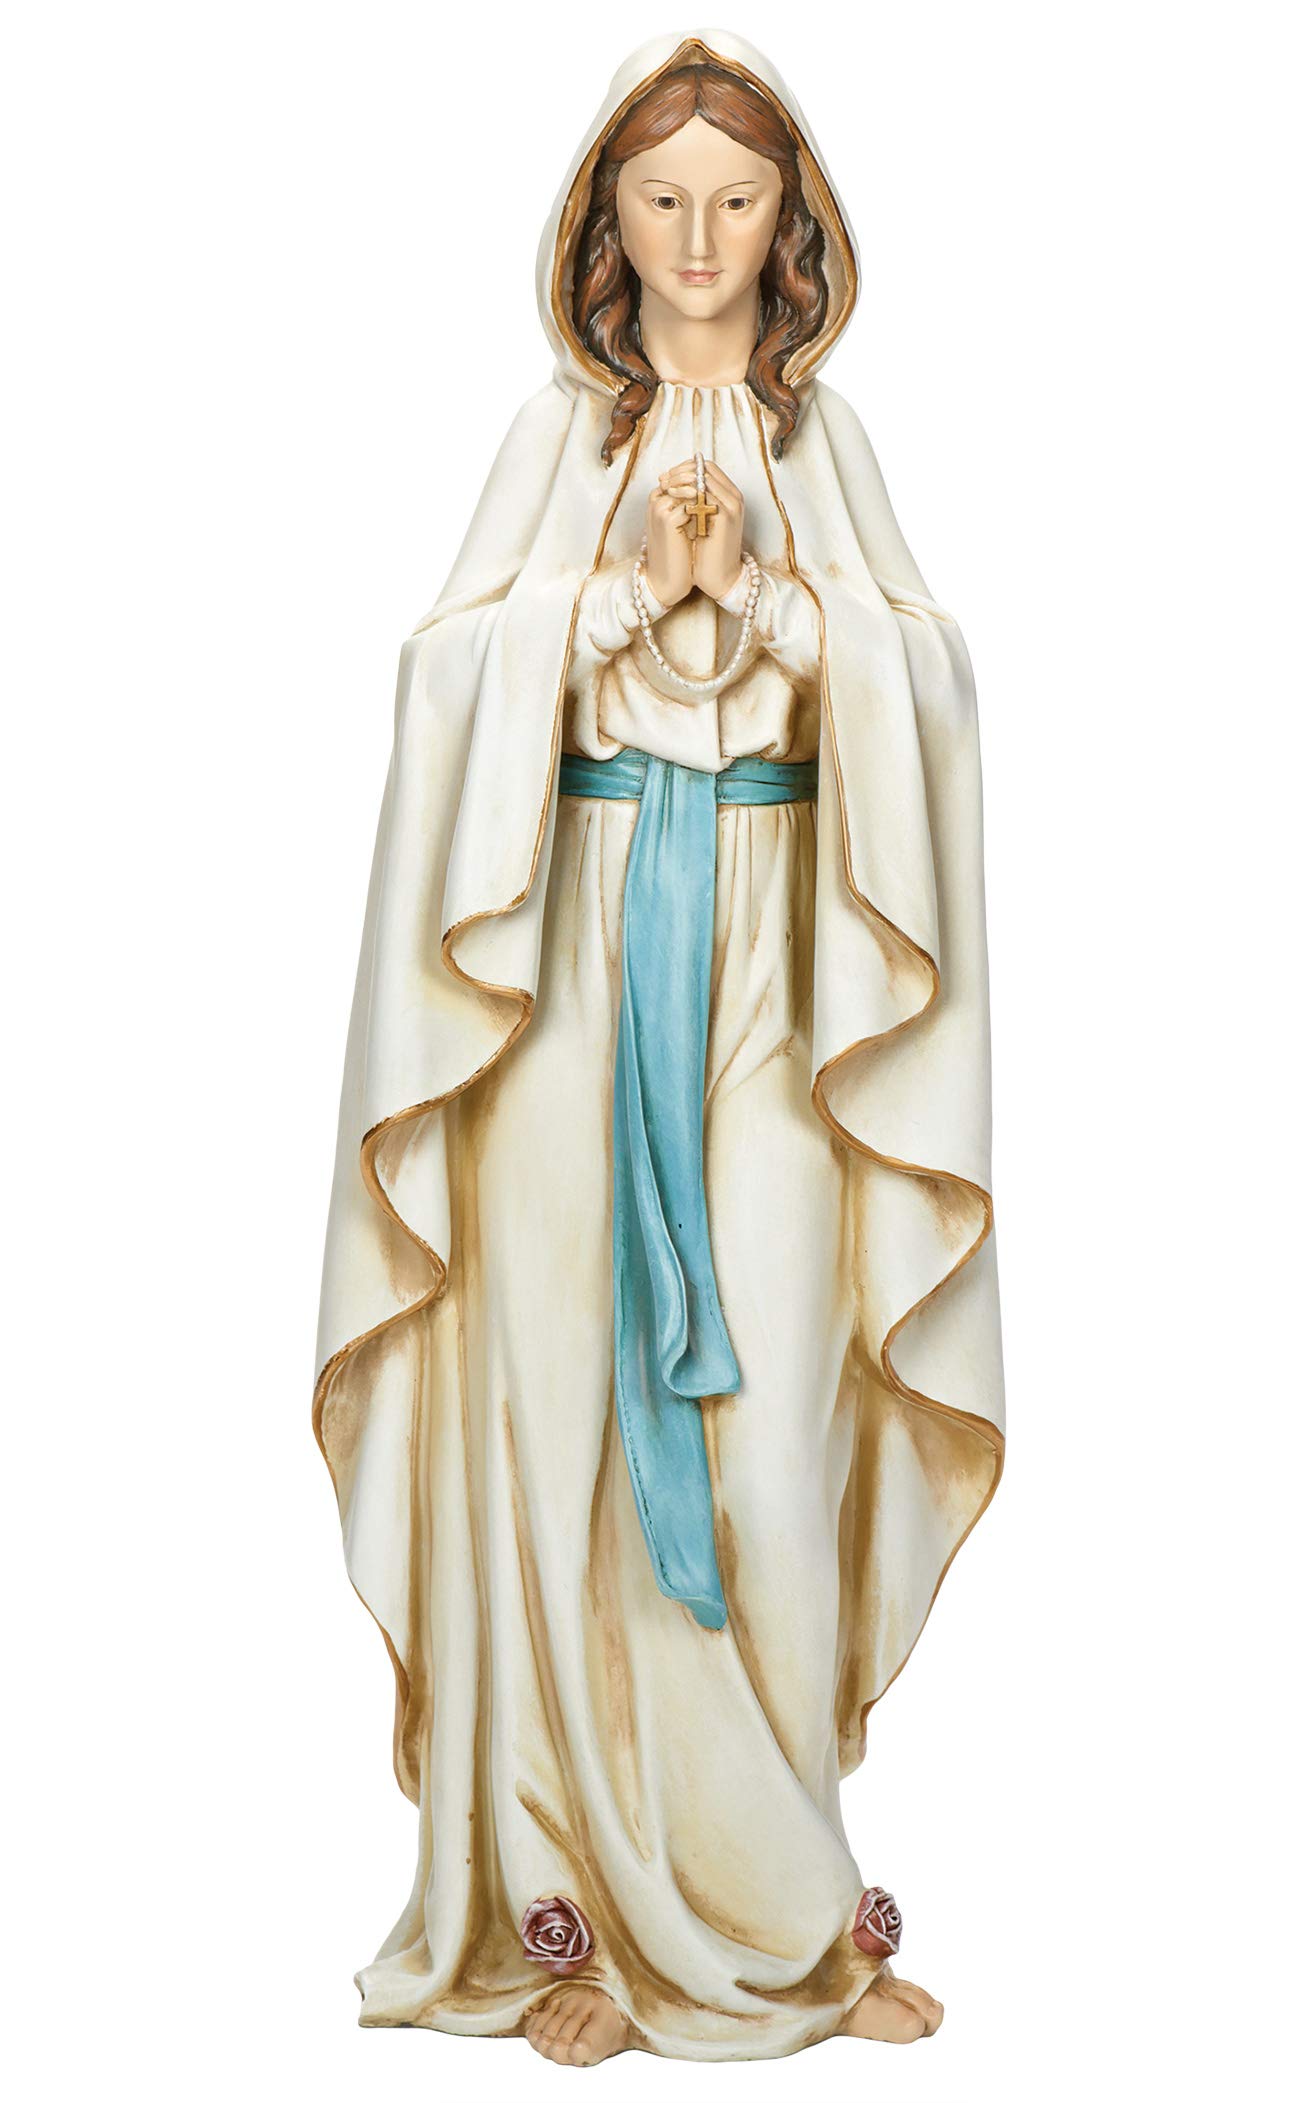 Joseph's Studio by Roman - Our Lady of Lourdes Figure, 24" Scale Renaissance Collection, 23" H, Resin and Stone, Religious Gift, Decora...